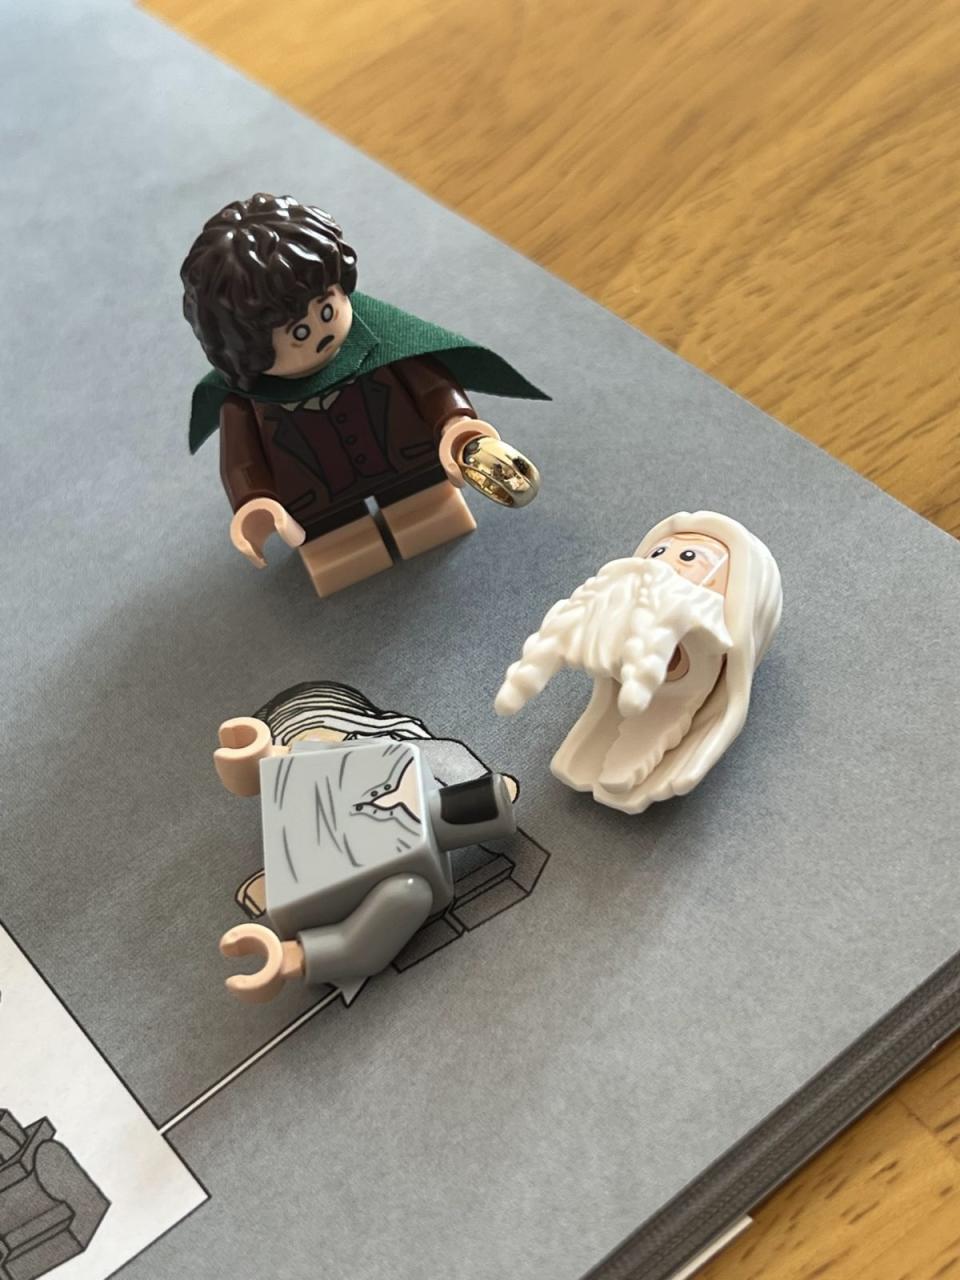 The Lord of the Rings LEGO minifigures Frodo and Gloin